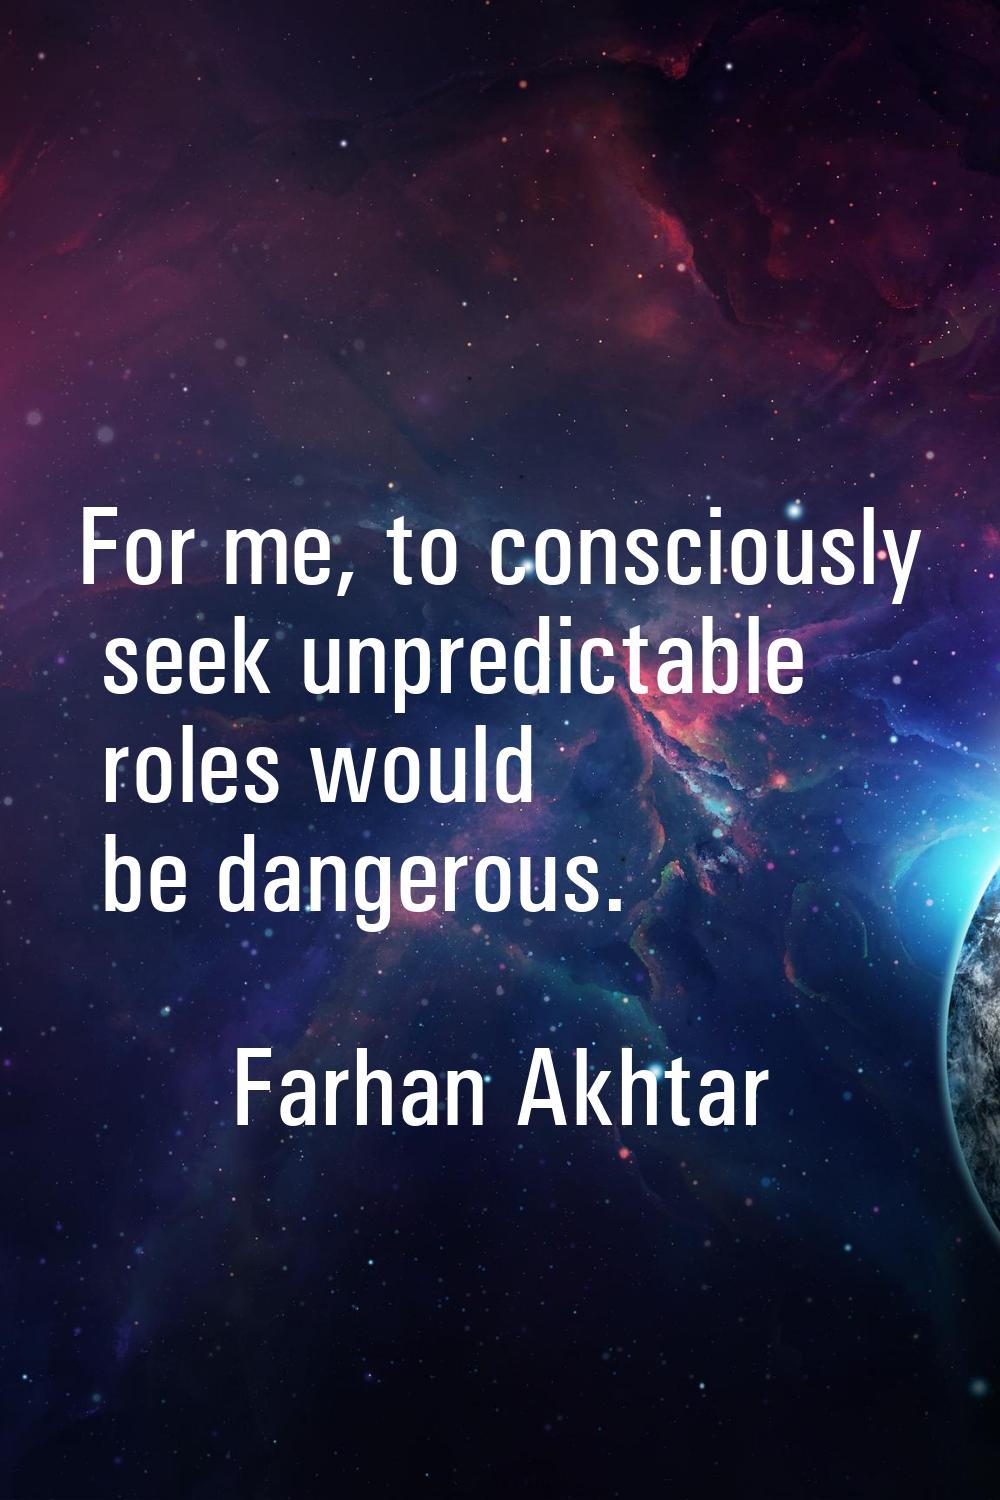 For me, to consciously seek unpredictable roles would be dangerous.